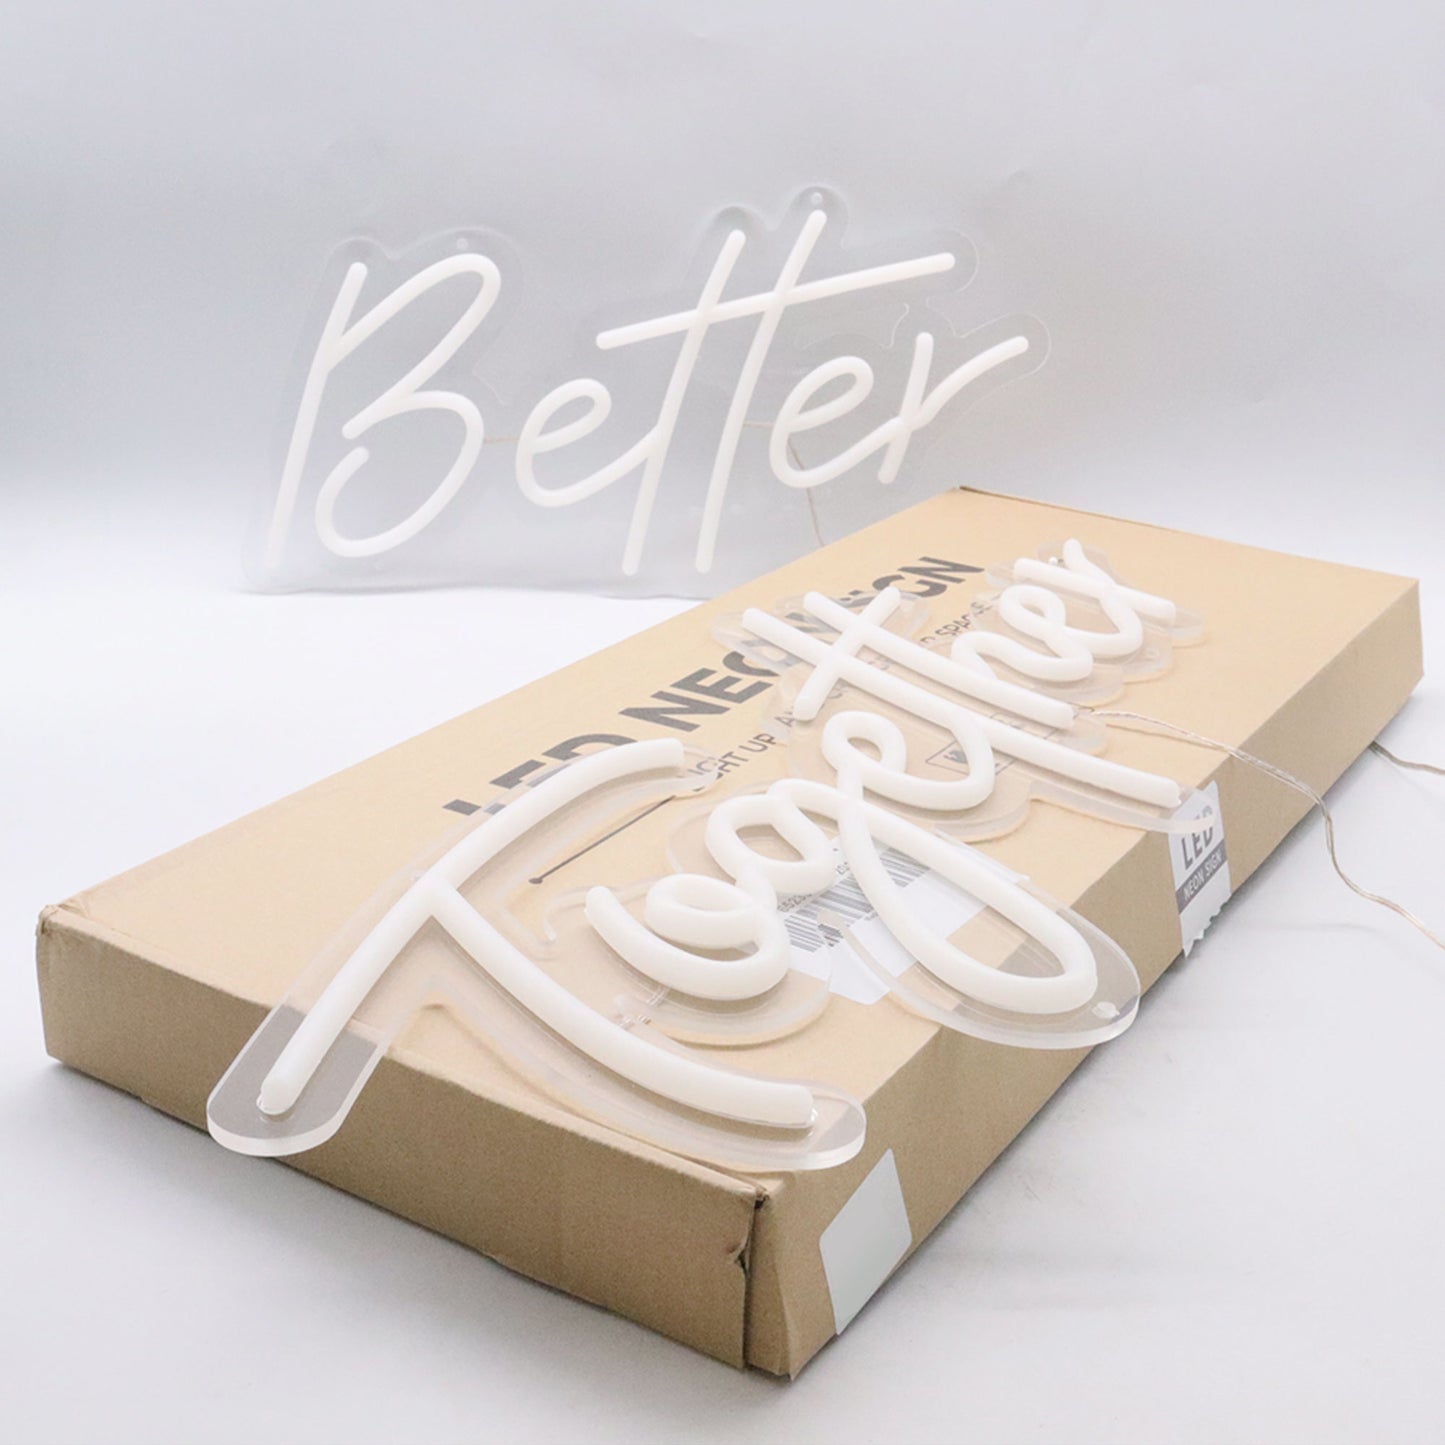 Hire - "Better Together" Neon sign / Pick up